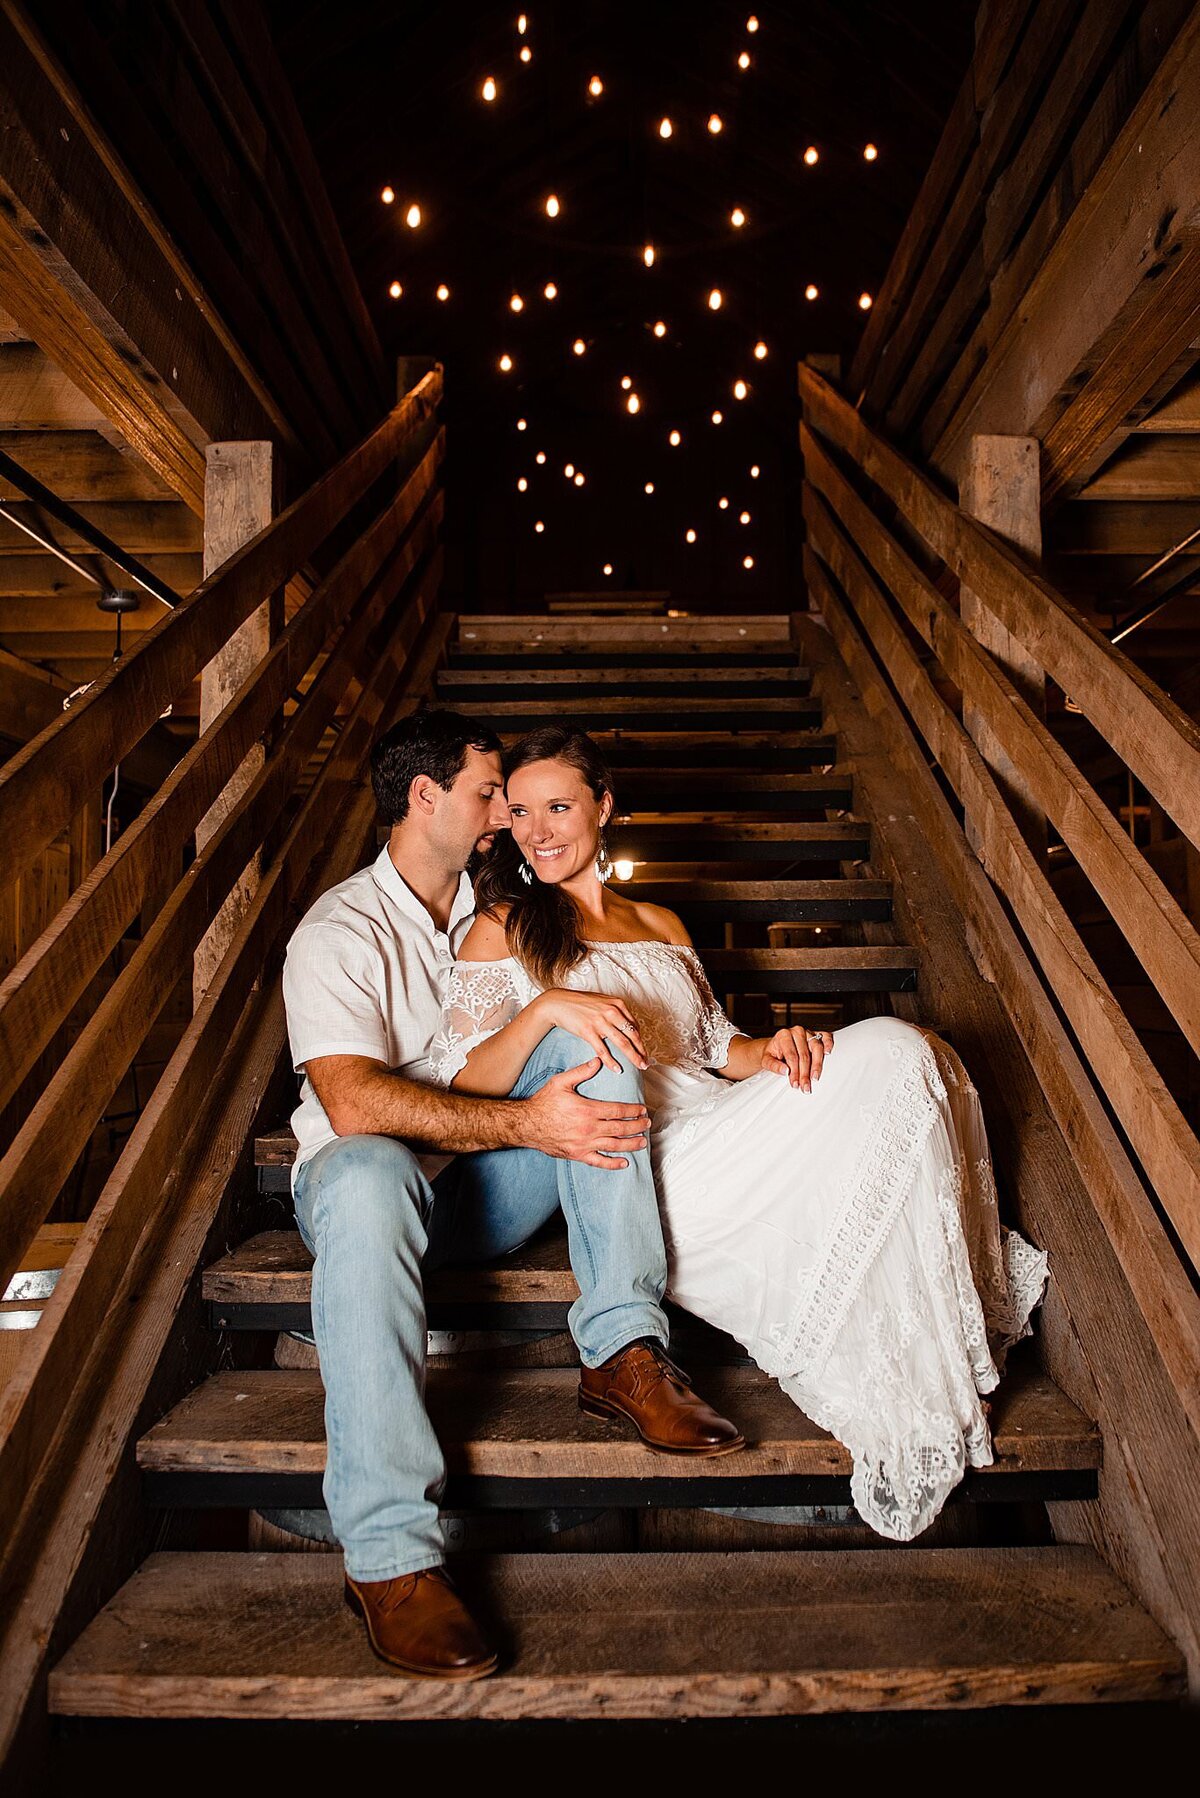 The bride and groom sit at the bottom of a wooden staircase. The groom, wearing brown shoes, light blue jeans and a white short sleeved golf shirt, whispers into the bride's ear. The bride leans against him and laughs at what he is whispering to her.  The bride is wearing an off the shoulder lace boho maxi dress with a wide lace ruffle around her shoulders. The wooden railing for the stairs is on either side of them and the string lighting at the top of the stairs looks like stars in the night sky.